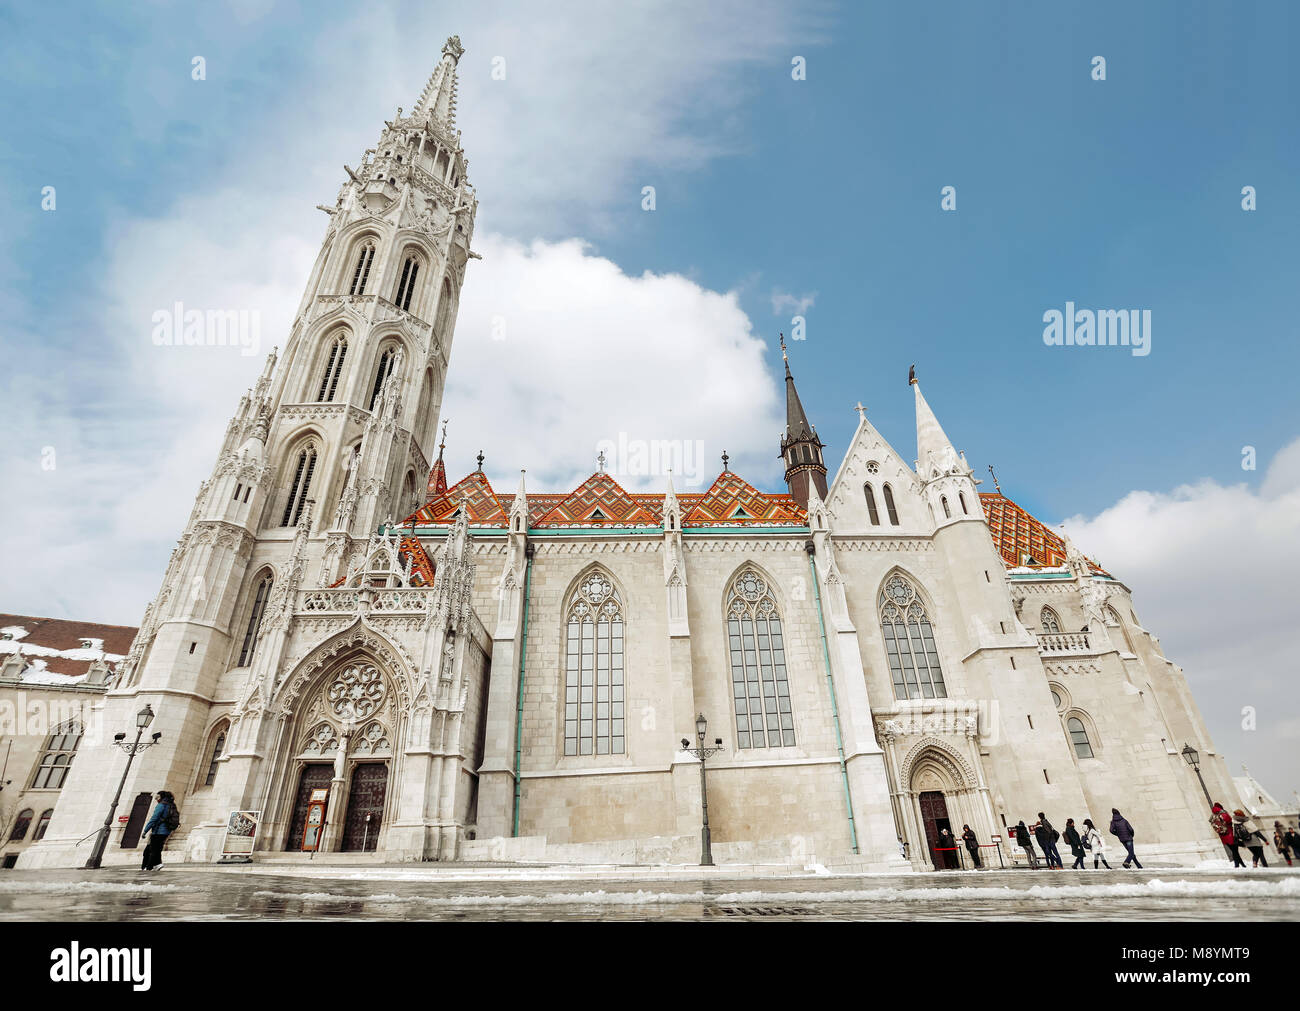 Budapest , Hungary. St. Matthias Church in old part of the city, Buda Castle hill. Church was used as a coronation church by Hungarian kings. Stock Photo